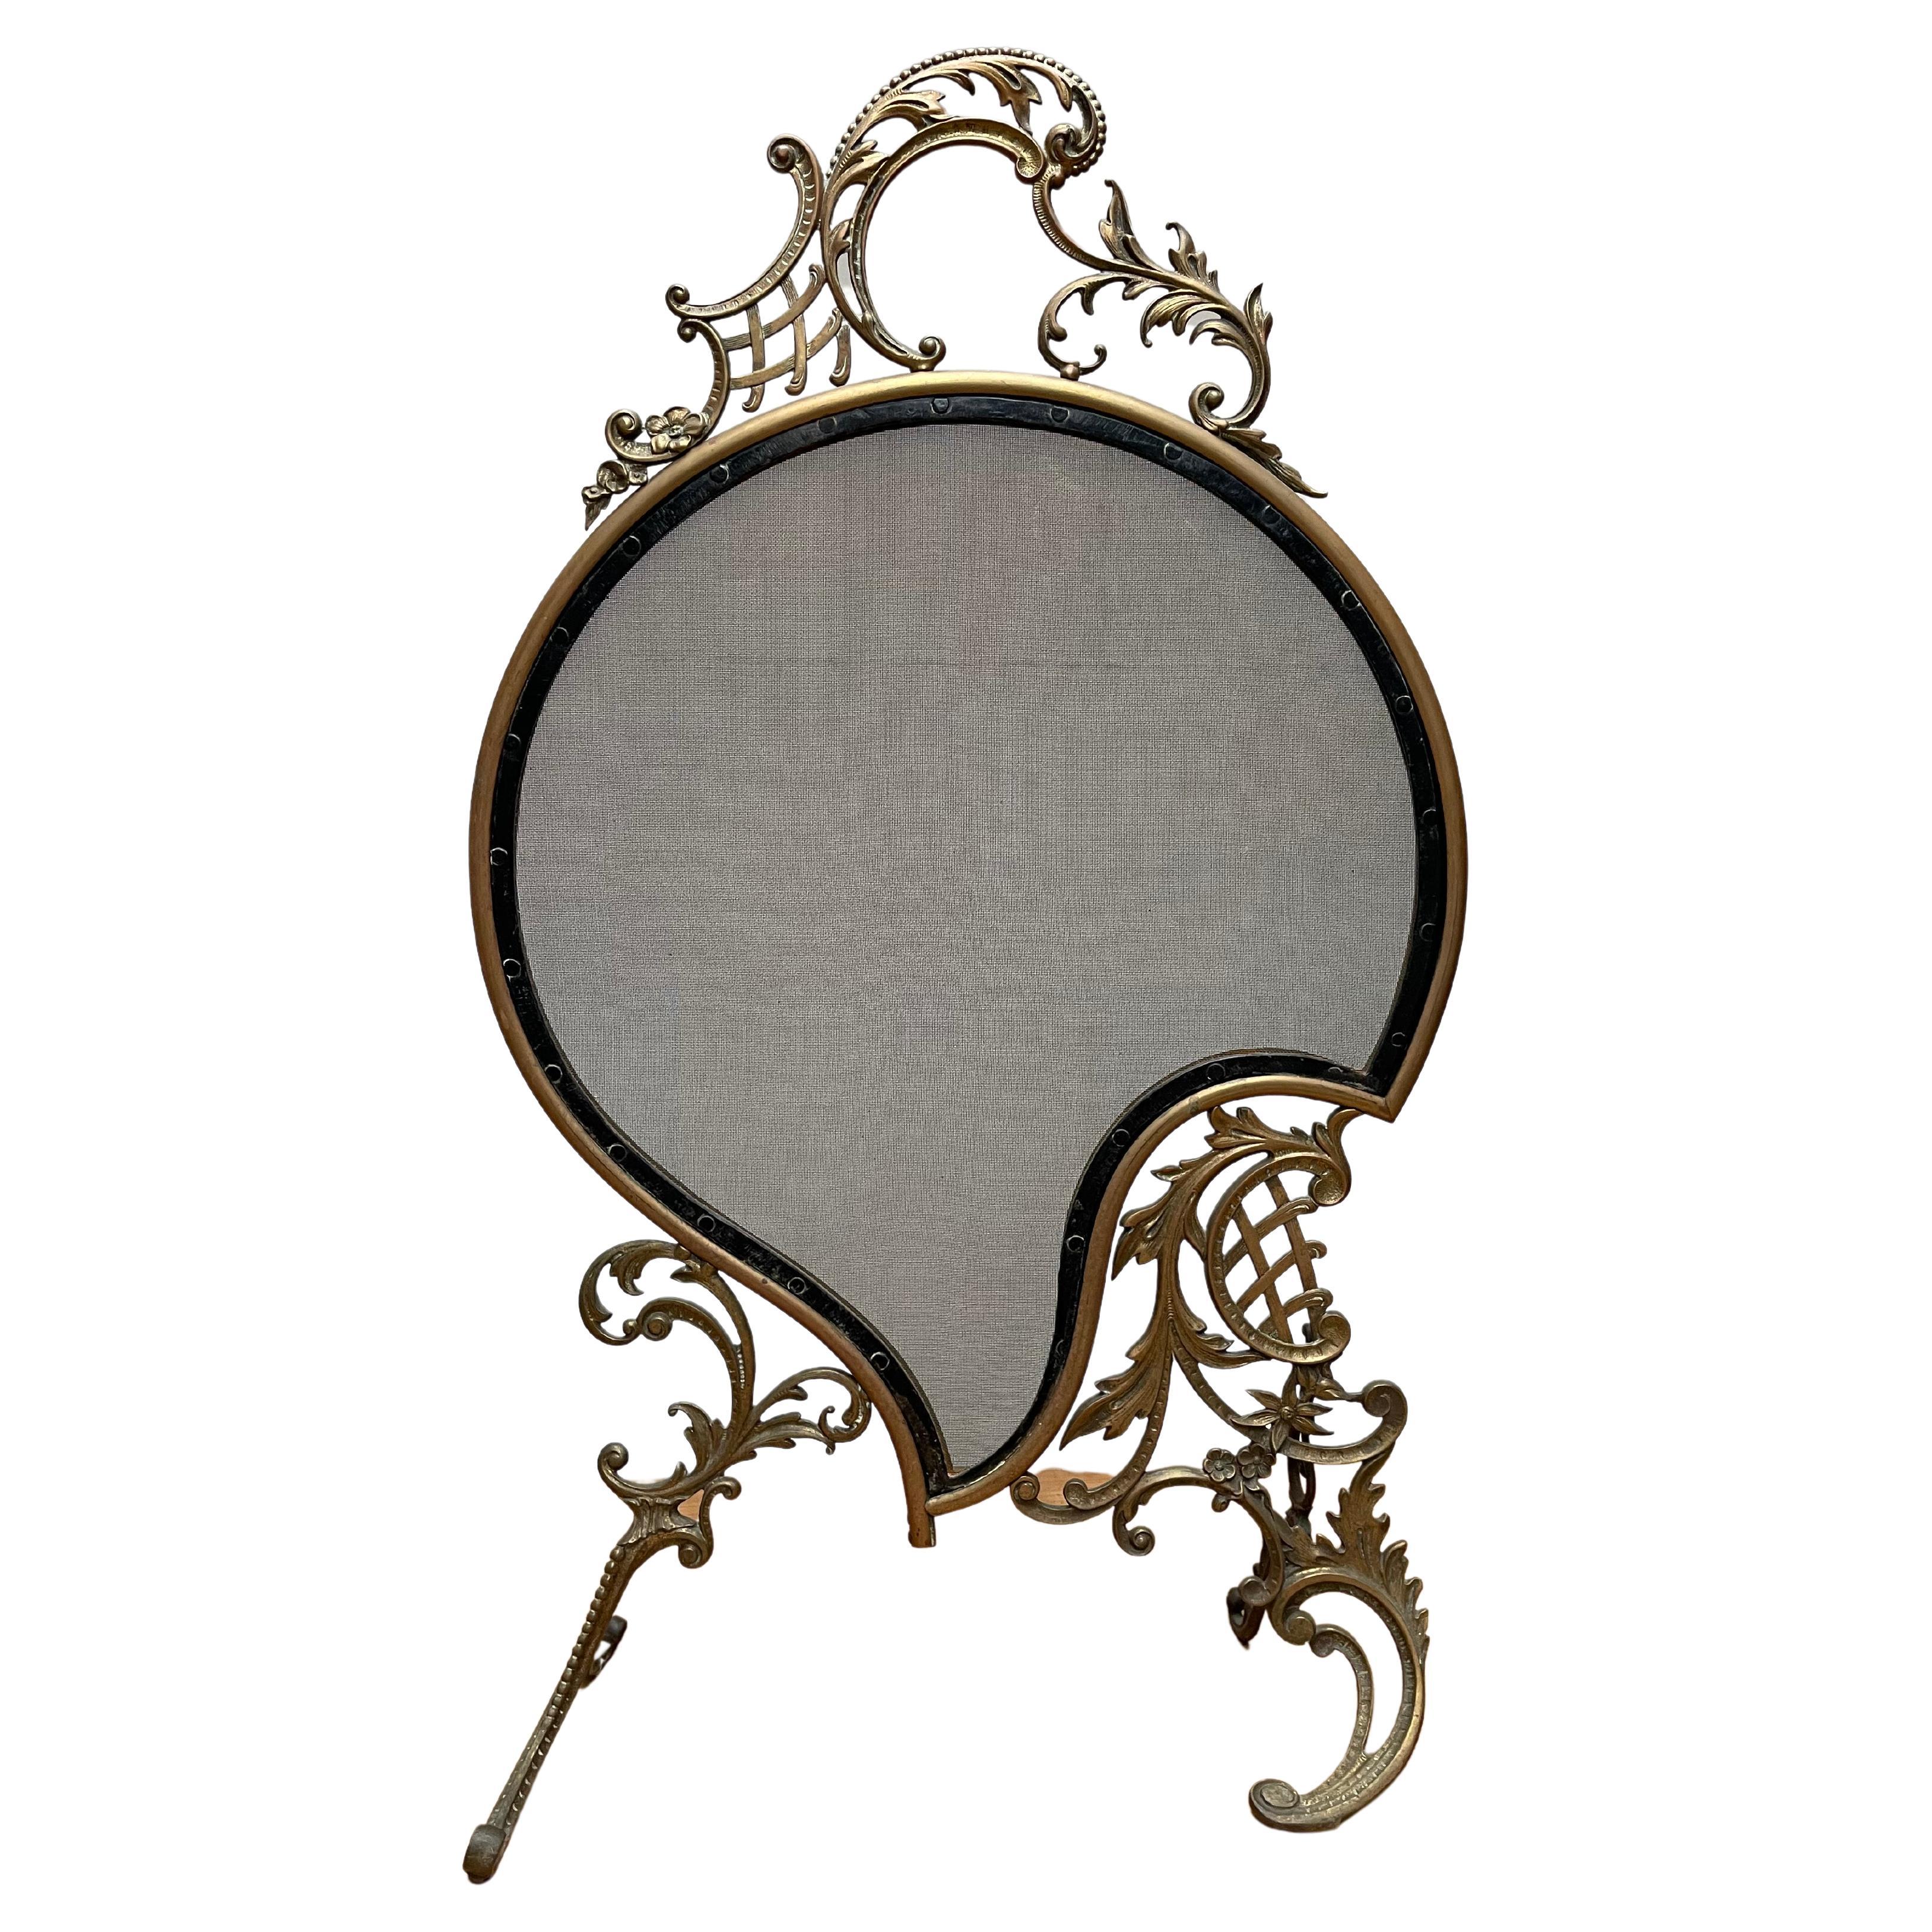 Elegant Early 1900 Bronze and Wrought Iron Fire Screen with Mint Wire Mesh